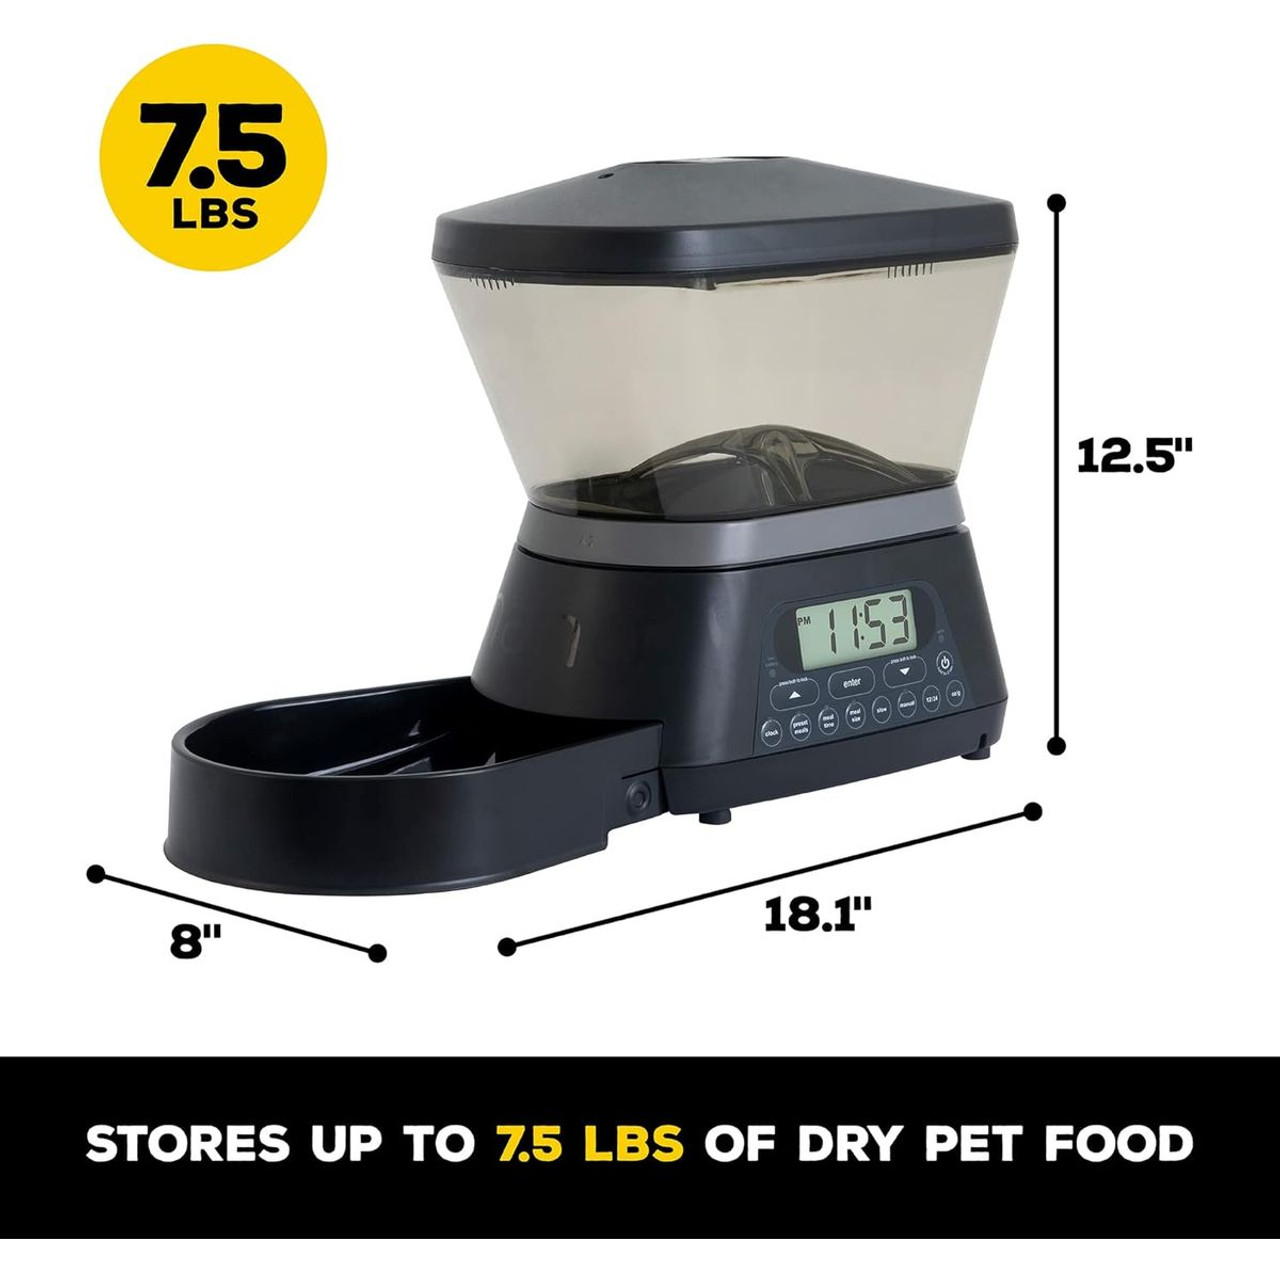 Gamma2™ Nano Automatic Pet Feeder for Cats & Dogs product image